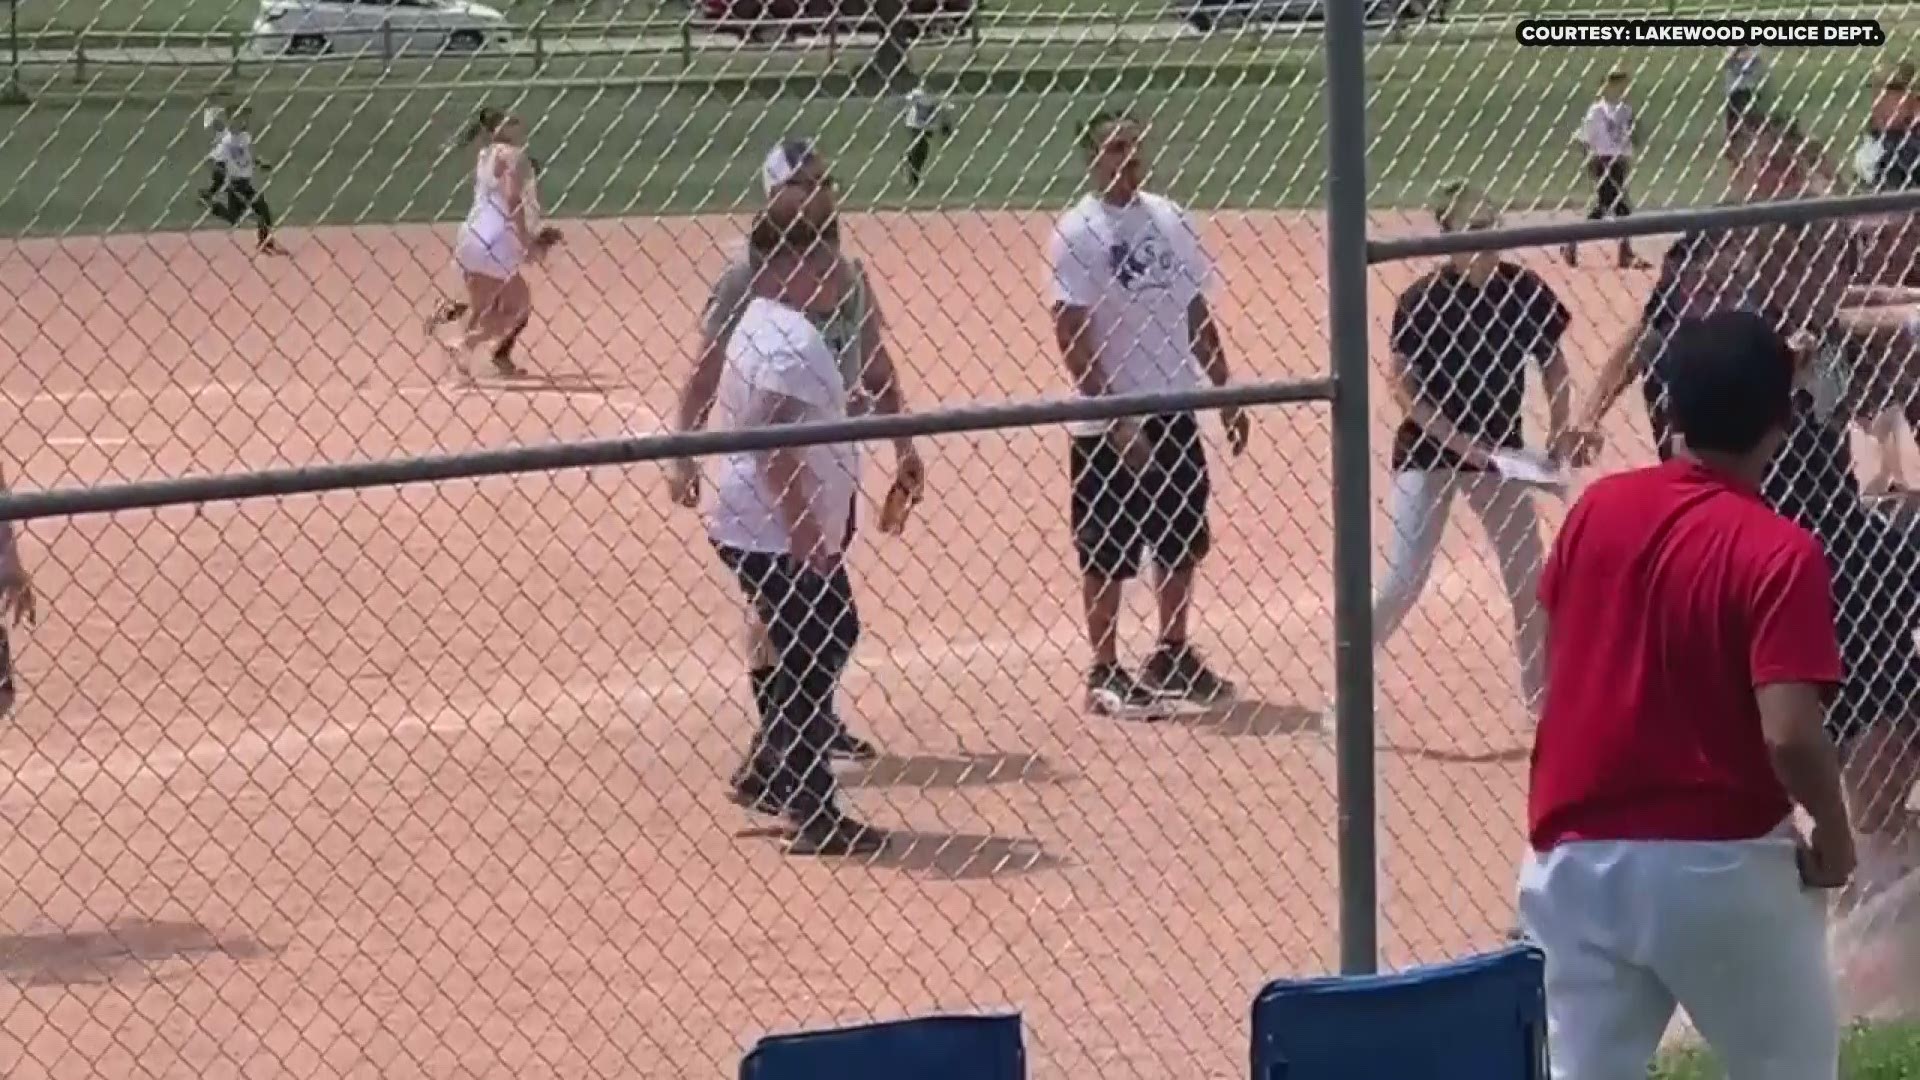 The punches fly at a kids’ baseball game in Lakewood, Colorado. Lakewood Police Department shared this video of the fight at Westgate Elementary during a Bear Creek Junior Baseball game. Police say it started with controversy over a call. A 13-year-old umpire said one of the 7-year-olds batted out of order.